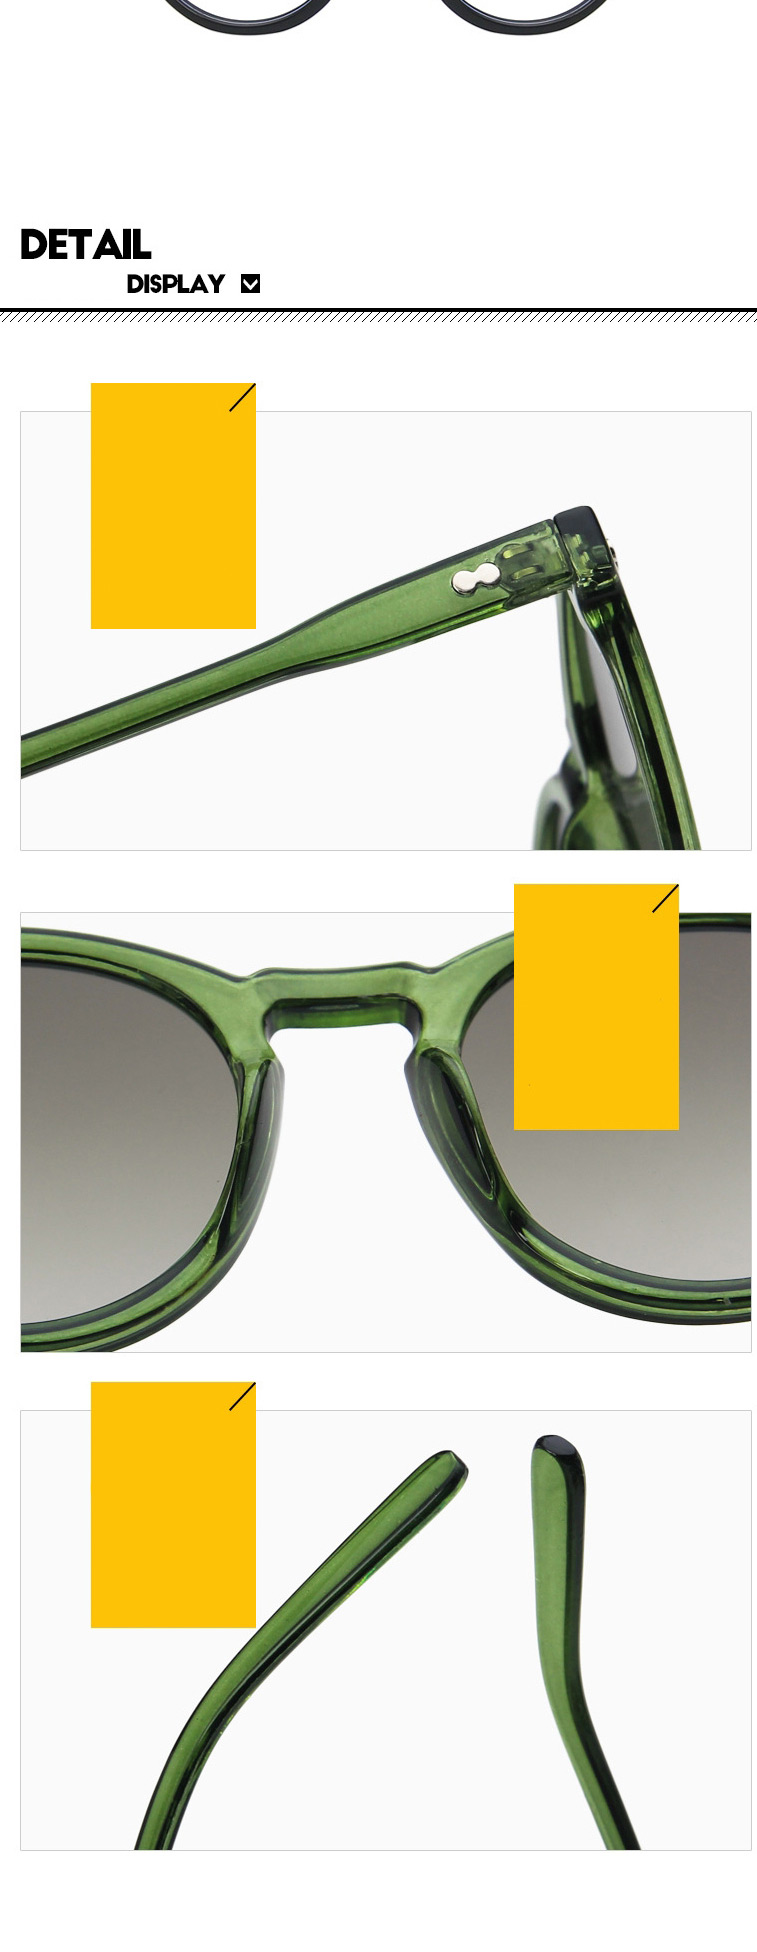 Fashion Olive Green Double Green Small Frame Rice Nail Resin Round Sunglasses,Women Sunglasses